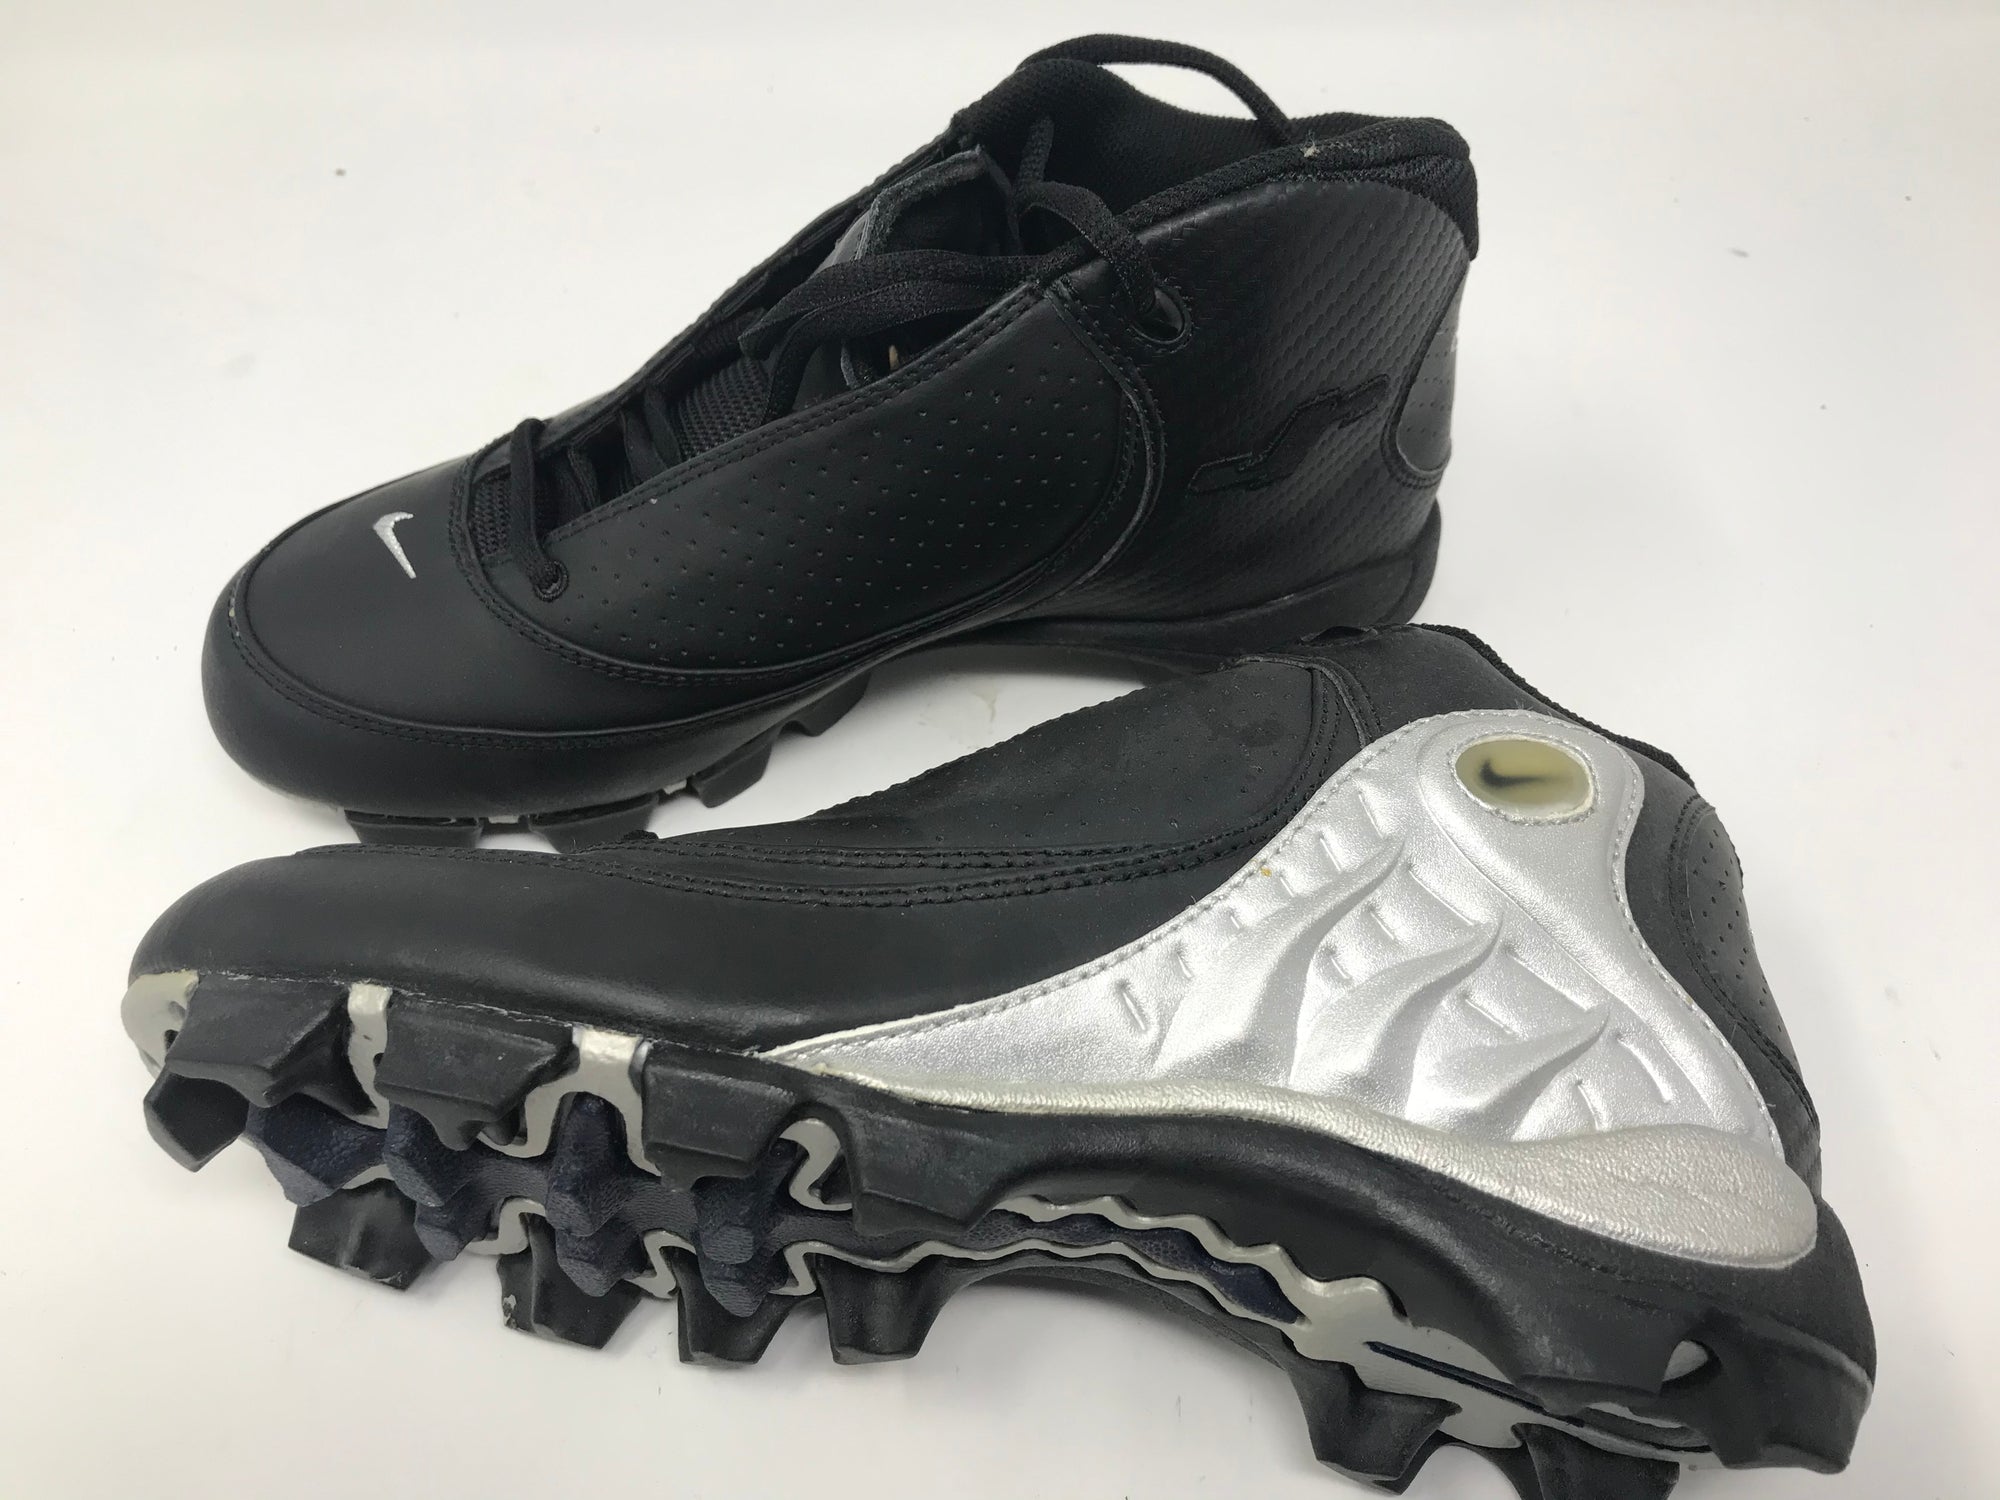 New Nike Air Griffey MCS Baseball Molded Cleats Black/Silver Men's 5.5 –  PremierSports